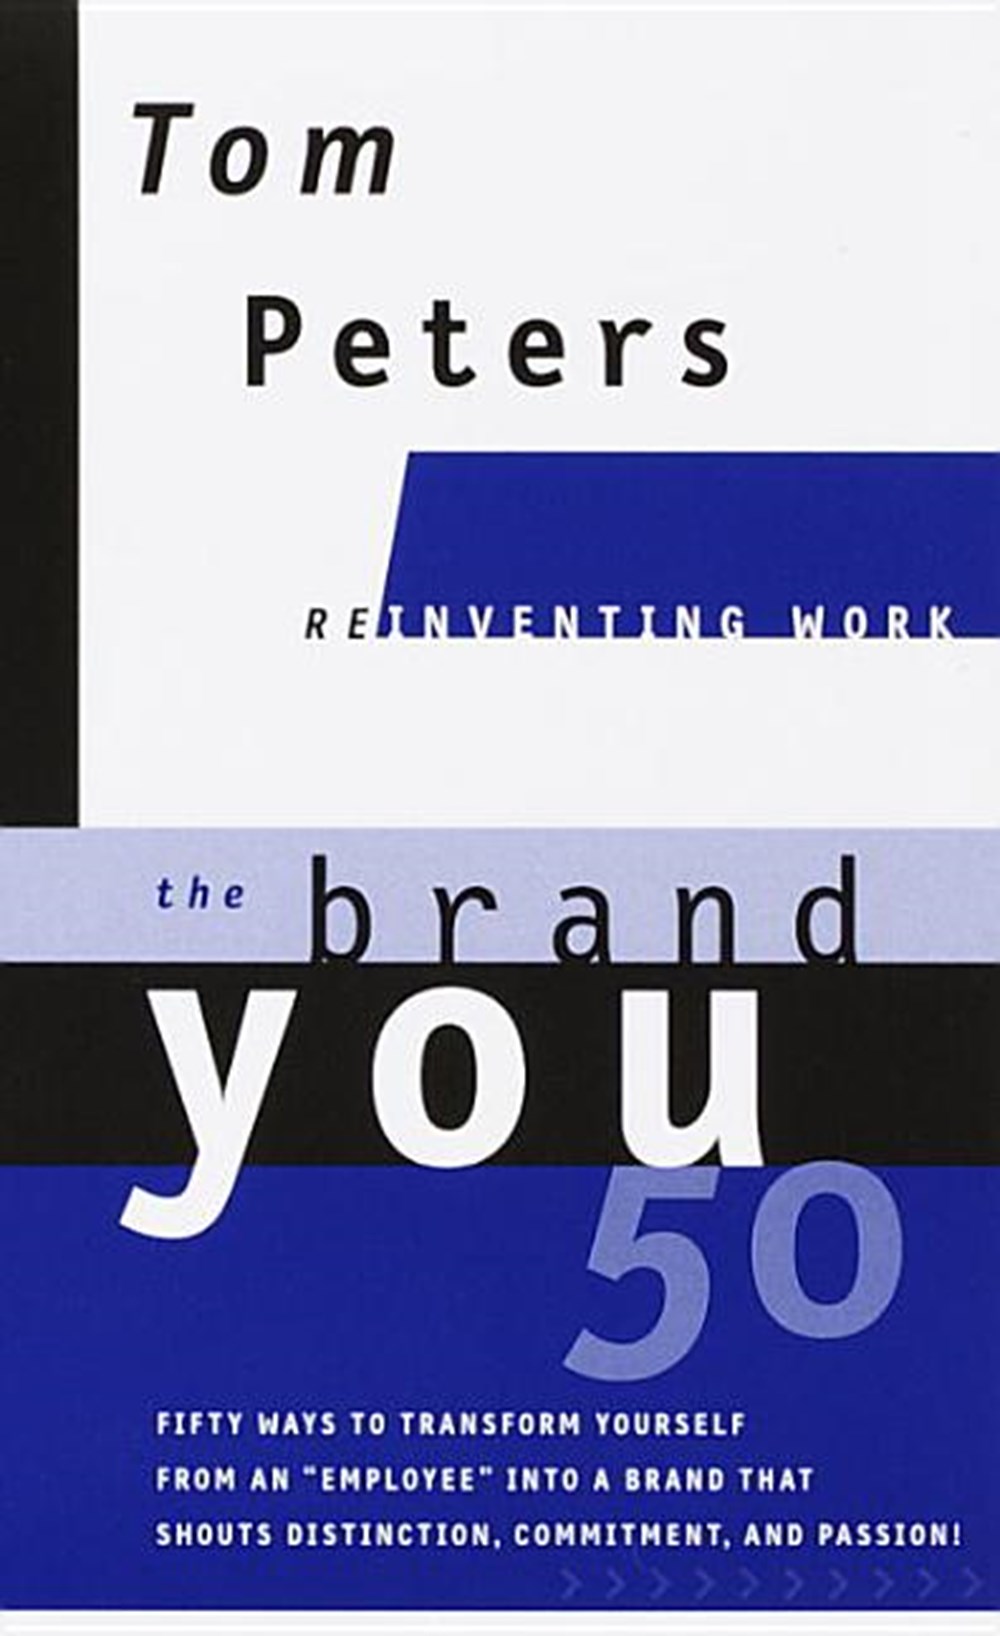 Brand You50 (Reinventing Work) Fifty Ways to Transform Yourself from an "employee" Into a Brand That